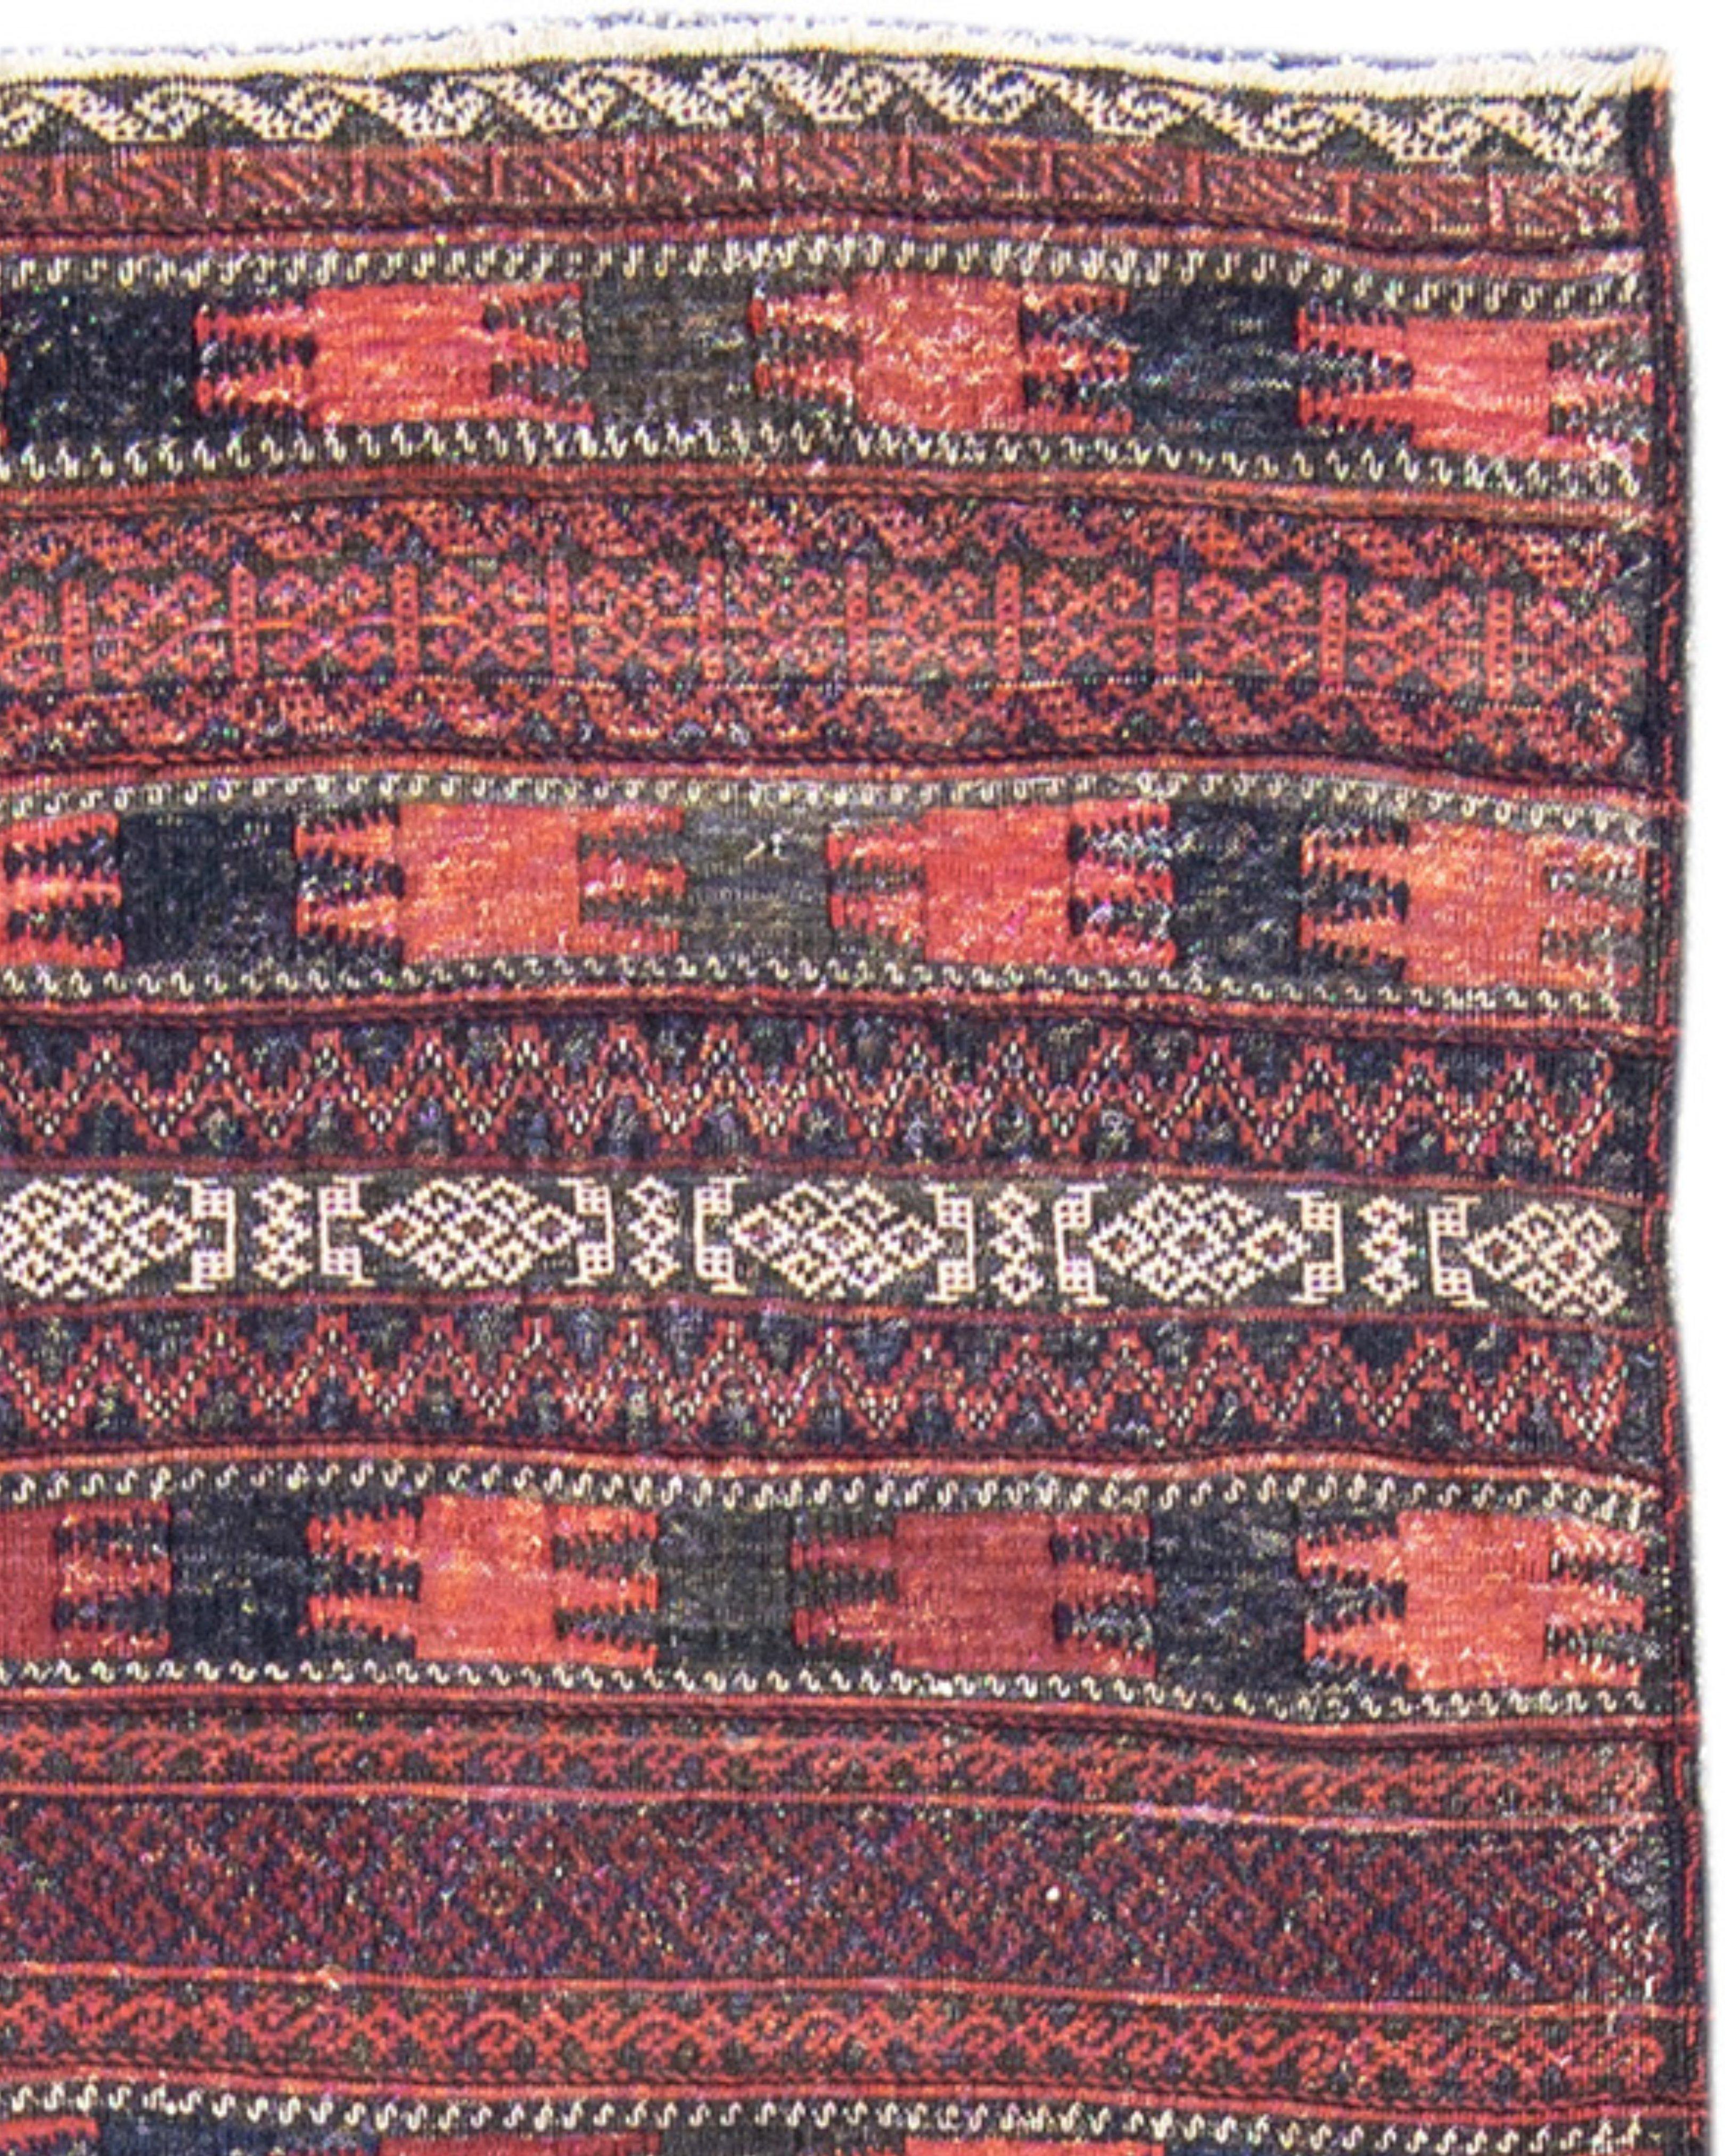 Baluch Flat-Woven Rug, c. 1900

Additional Information:
Dimensions: 3'0